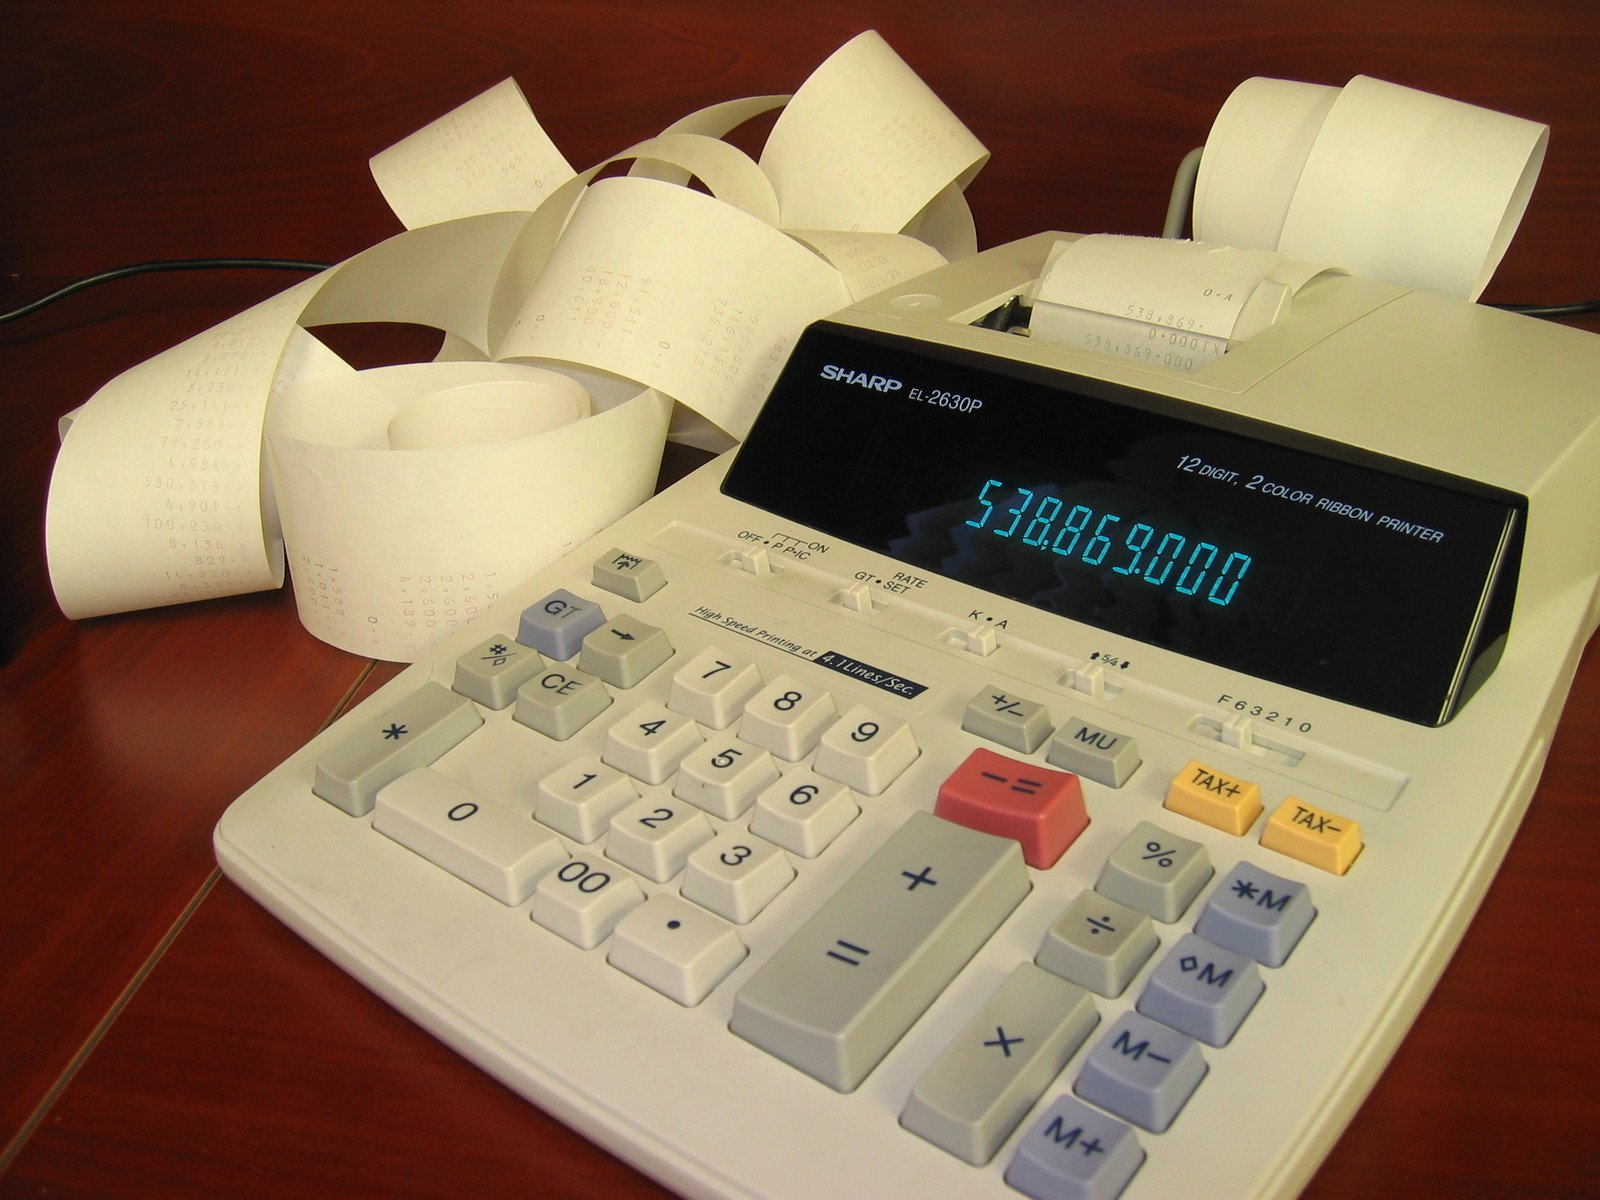 the calculator is on the table, next to tape and a roll of toilet paper